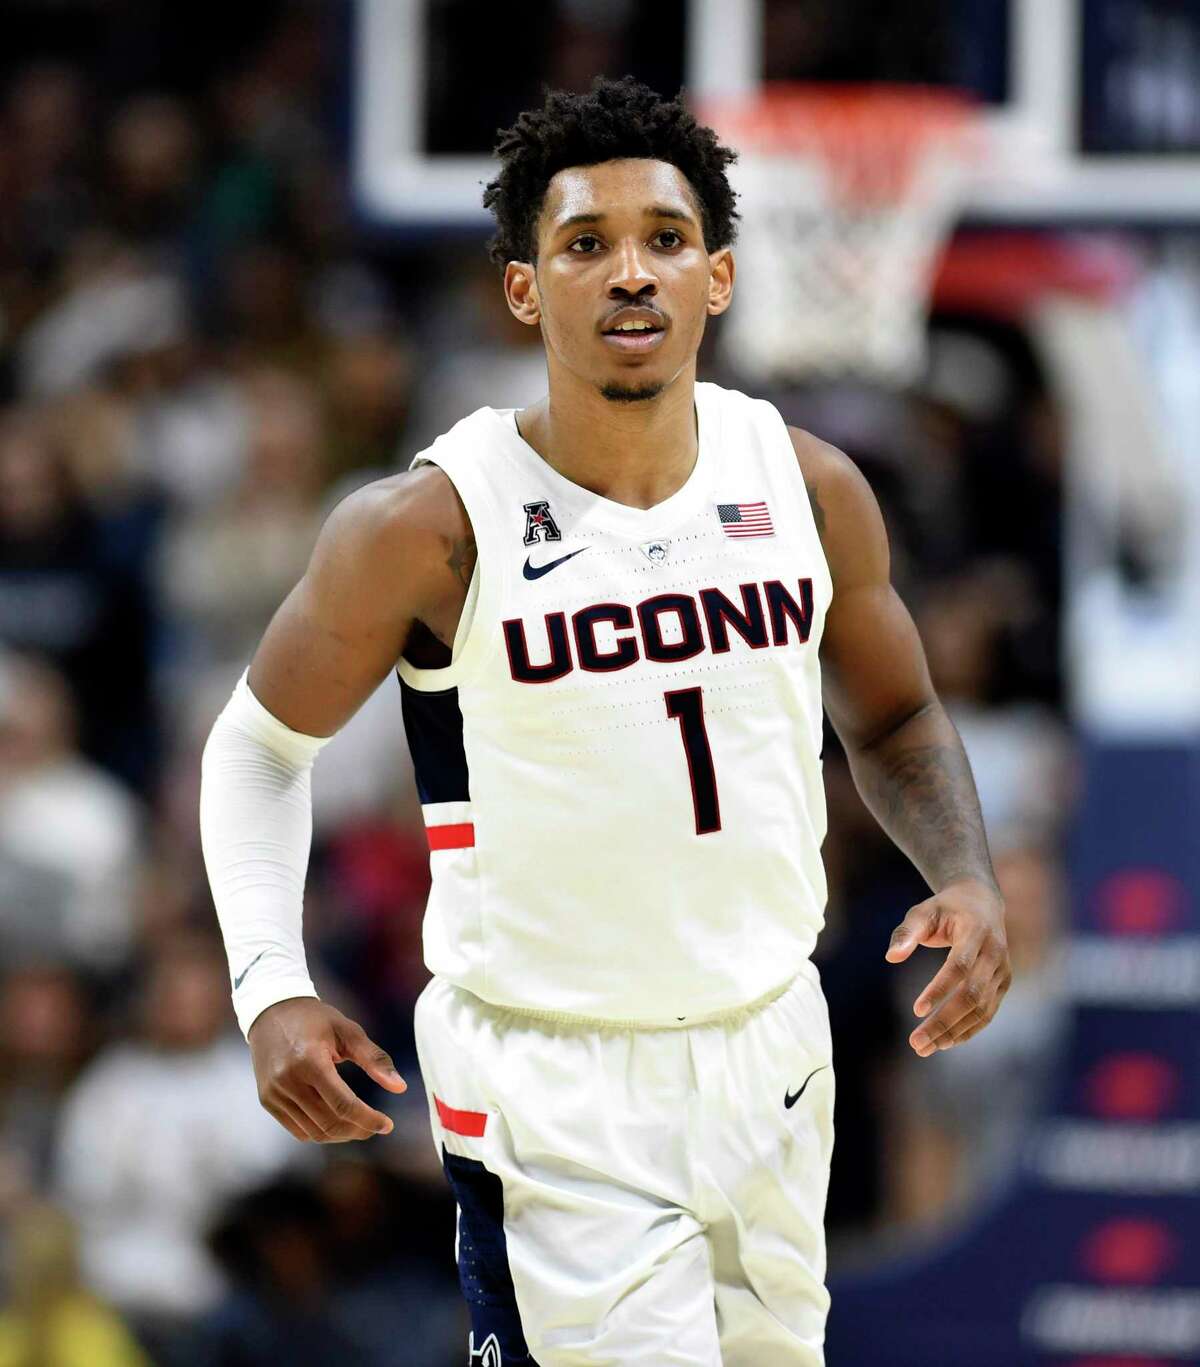 UConn’s Christian Vital is hoping to reach the postseason for the first time in his four years at the school this season.